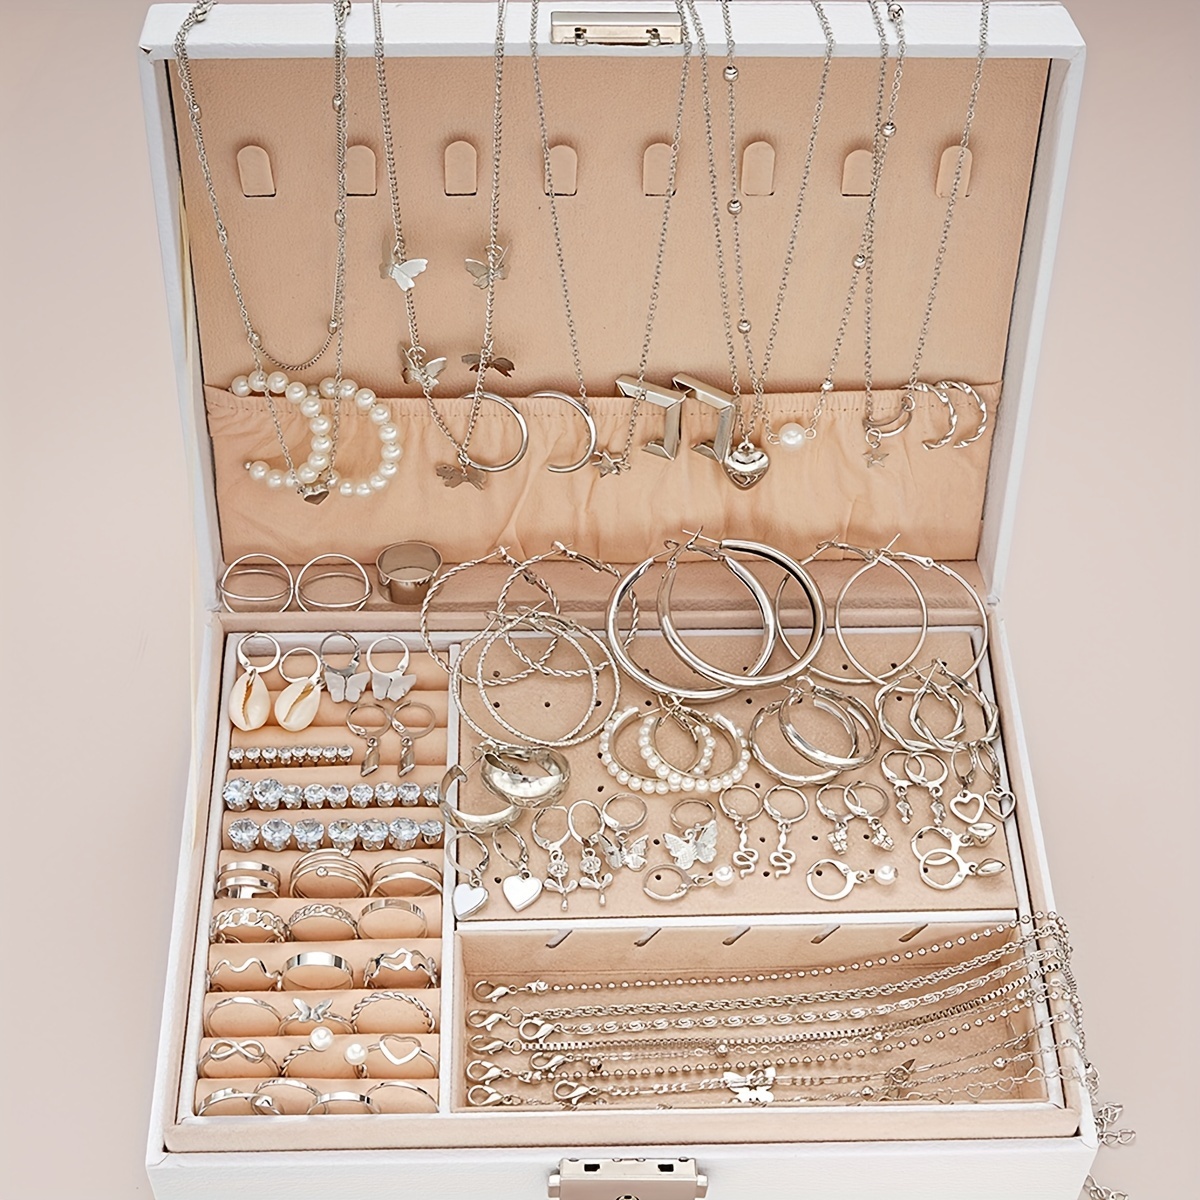 

108-piece Chic Jewelry Set For Women - Includes Bracelets, Necklaces, Earrings & Rings With Heart, Butterfly, Flower Designs - Perfect For Birthdays, Parties, Weddings (no Box)